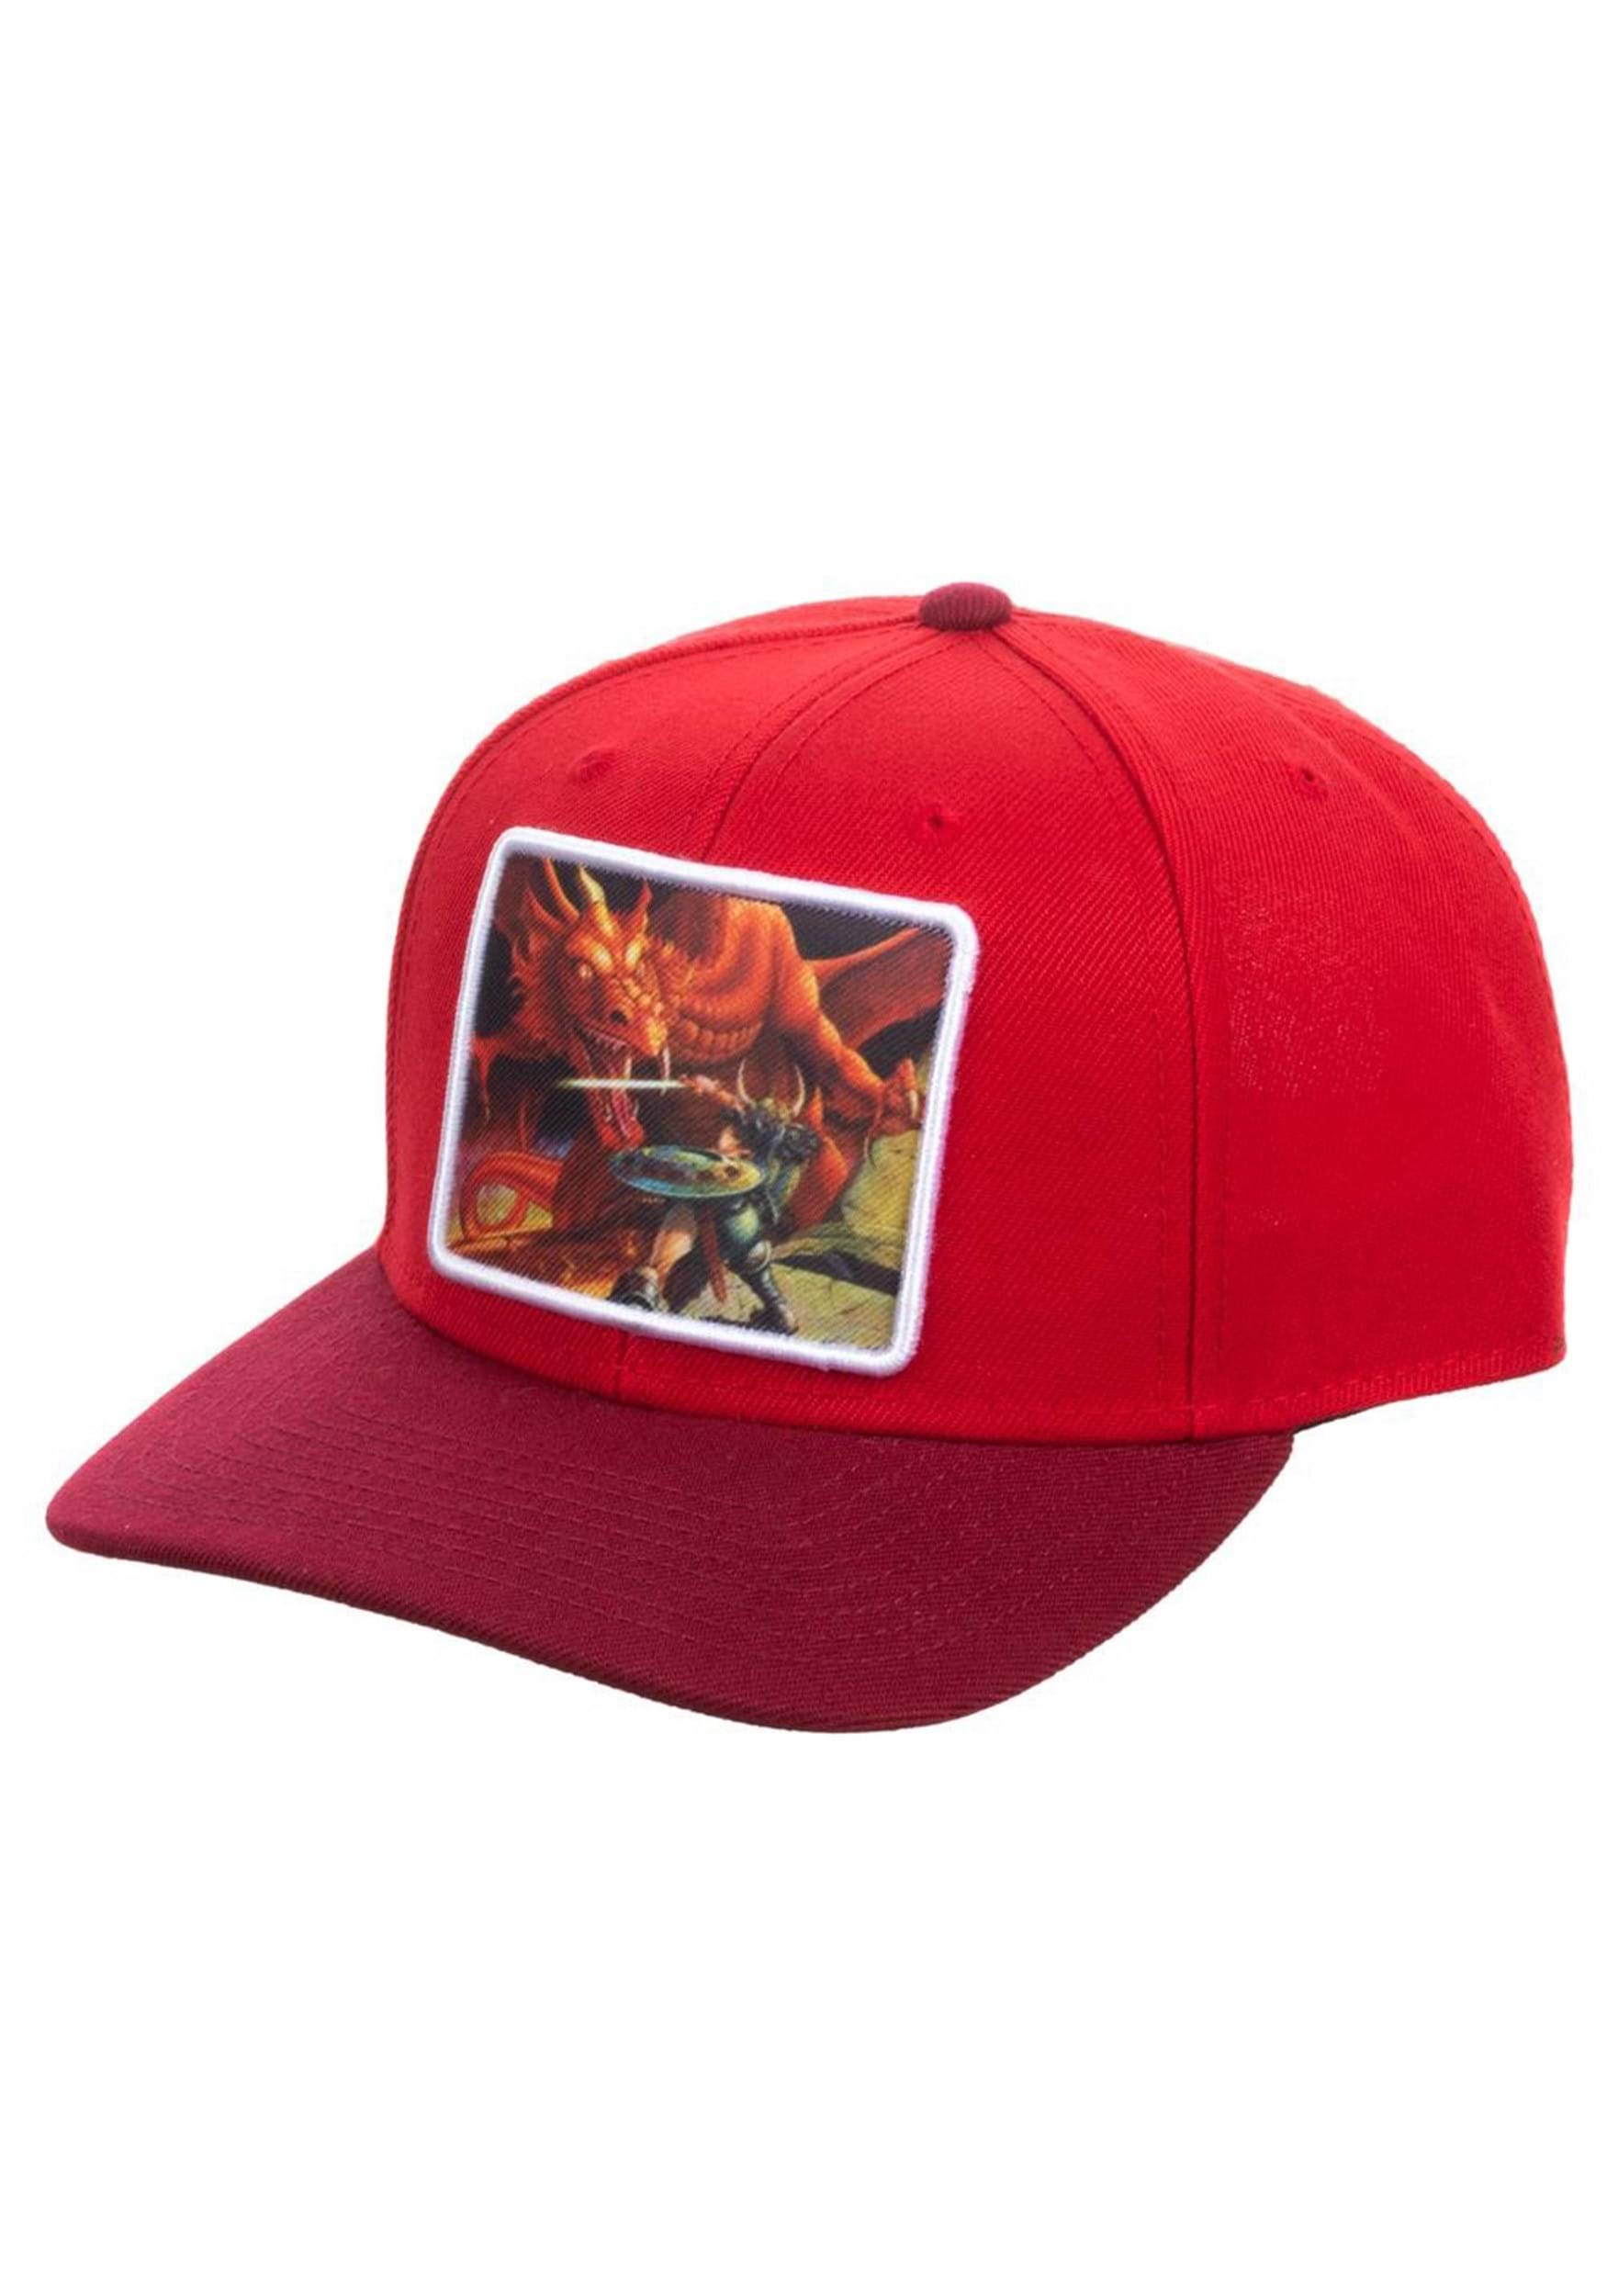 Pre-Curved Snapback Dungeons & Dragons Sublimated Patch